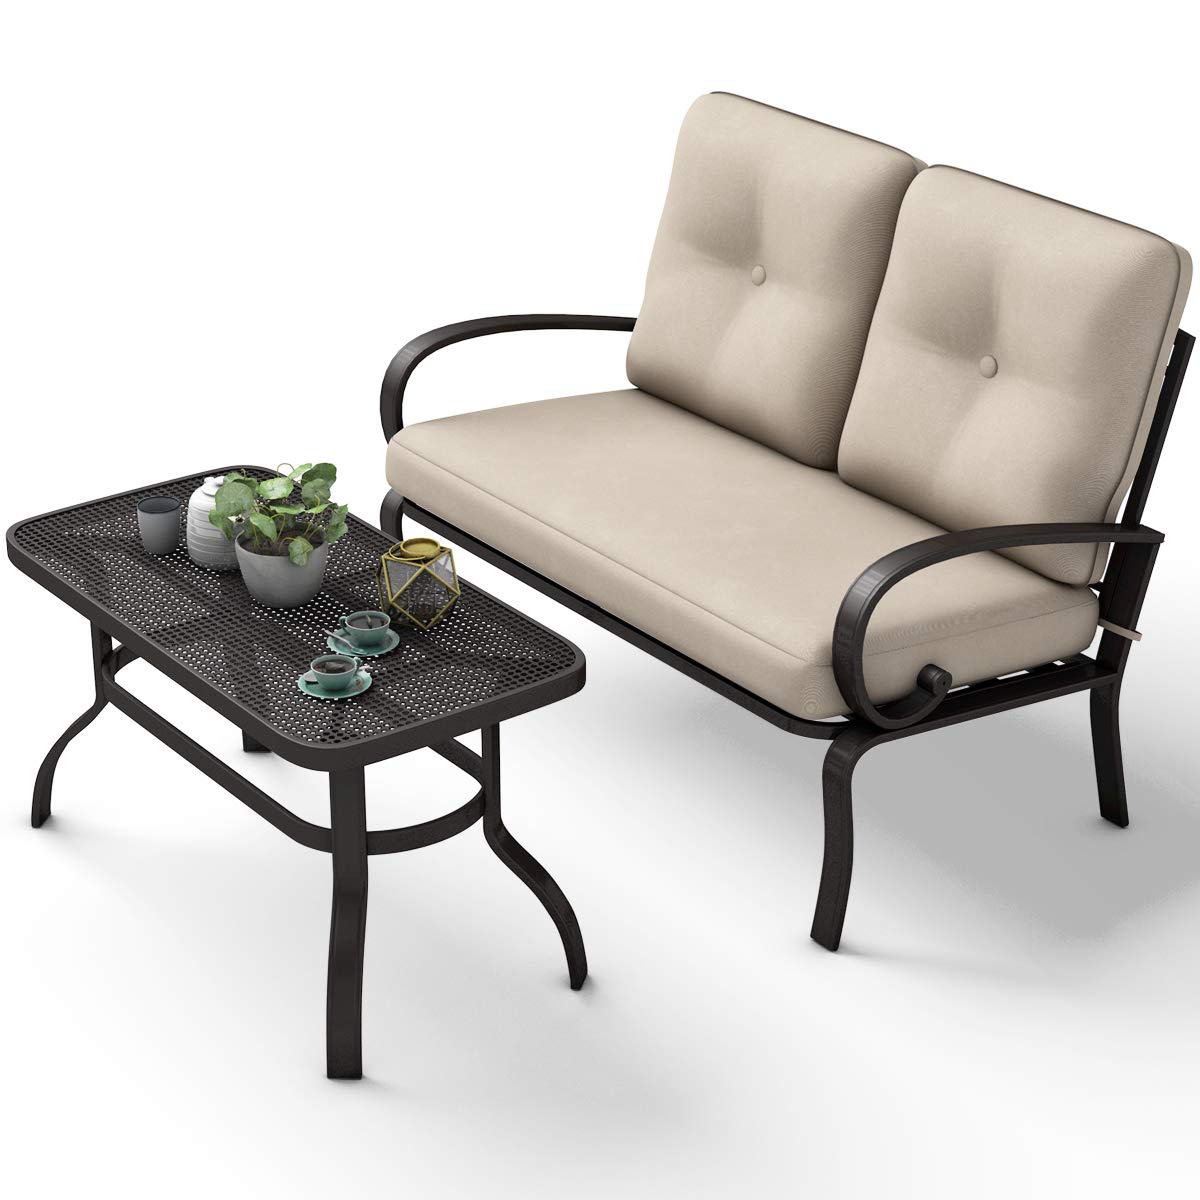 2 Pcs Patio Loveseat with Coffee Table Outdoor Bench with Cushion and Metal Frame